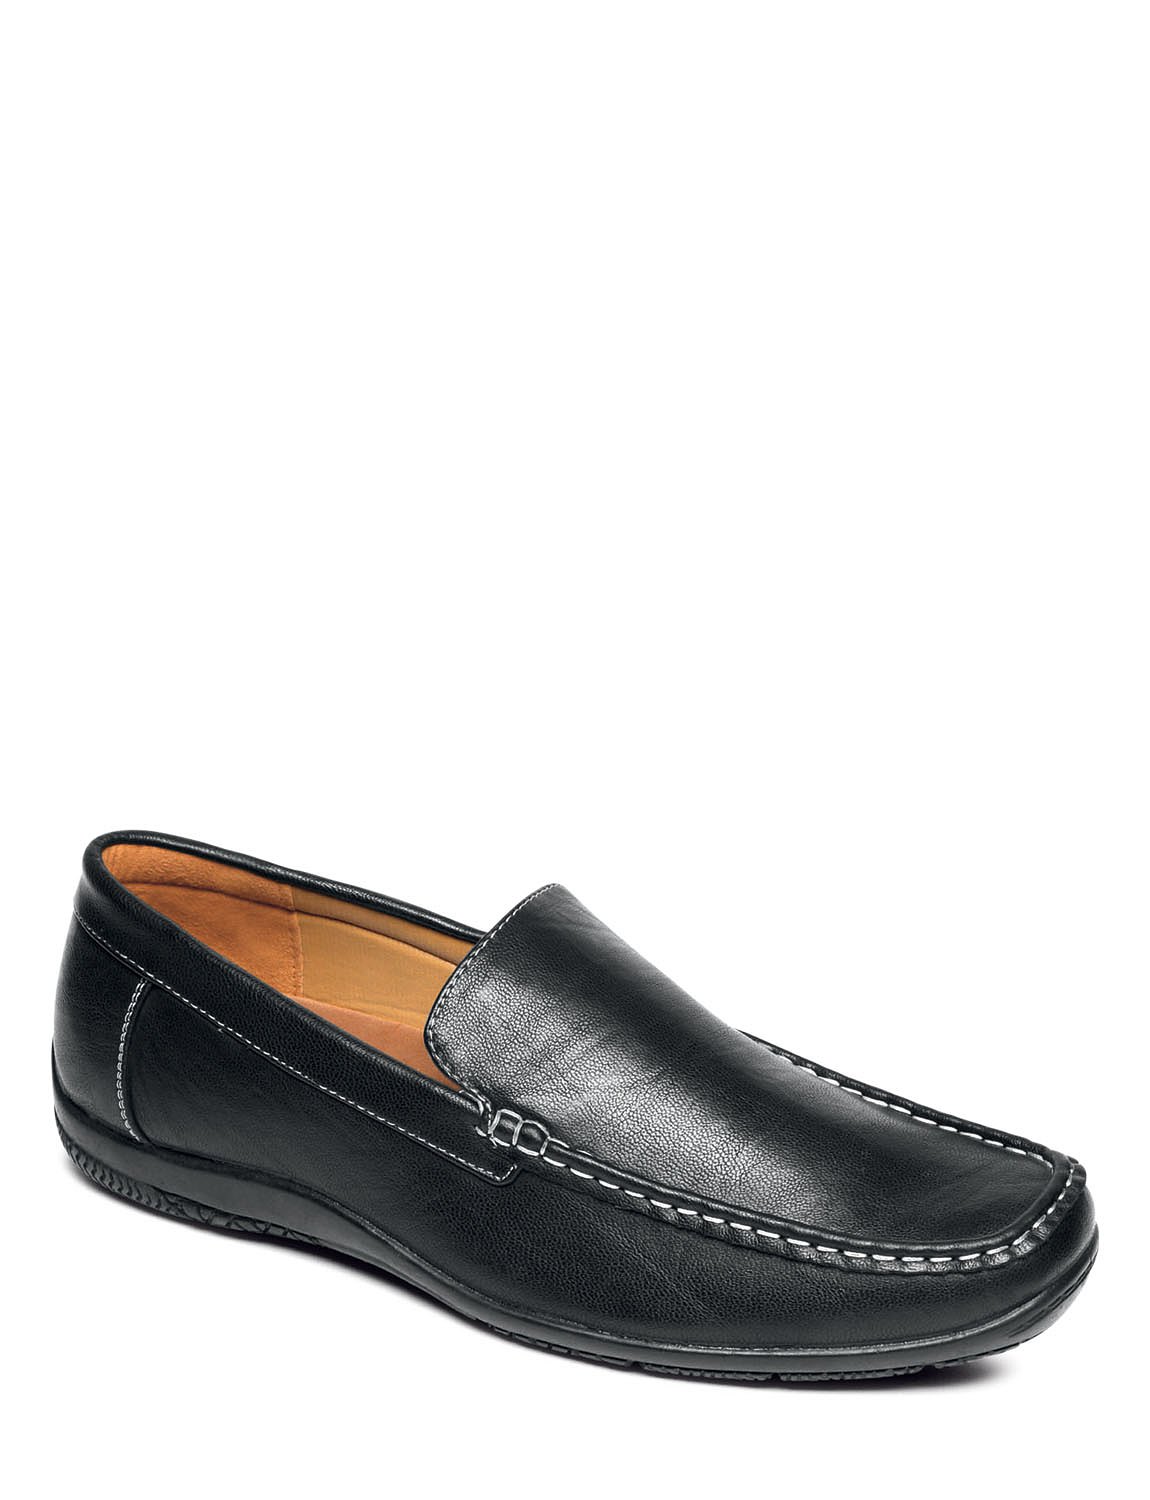 mens slip on casual shoes uk